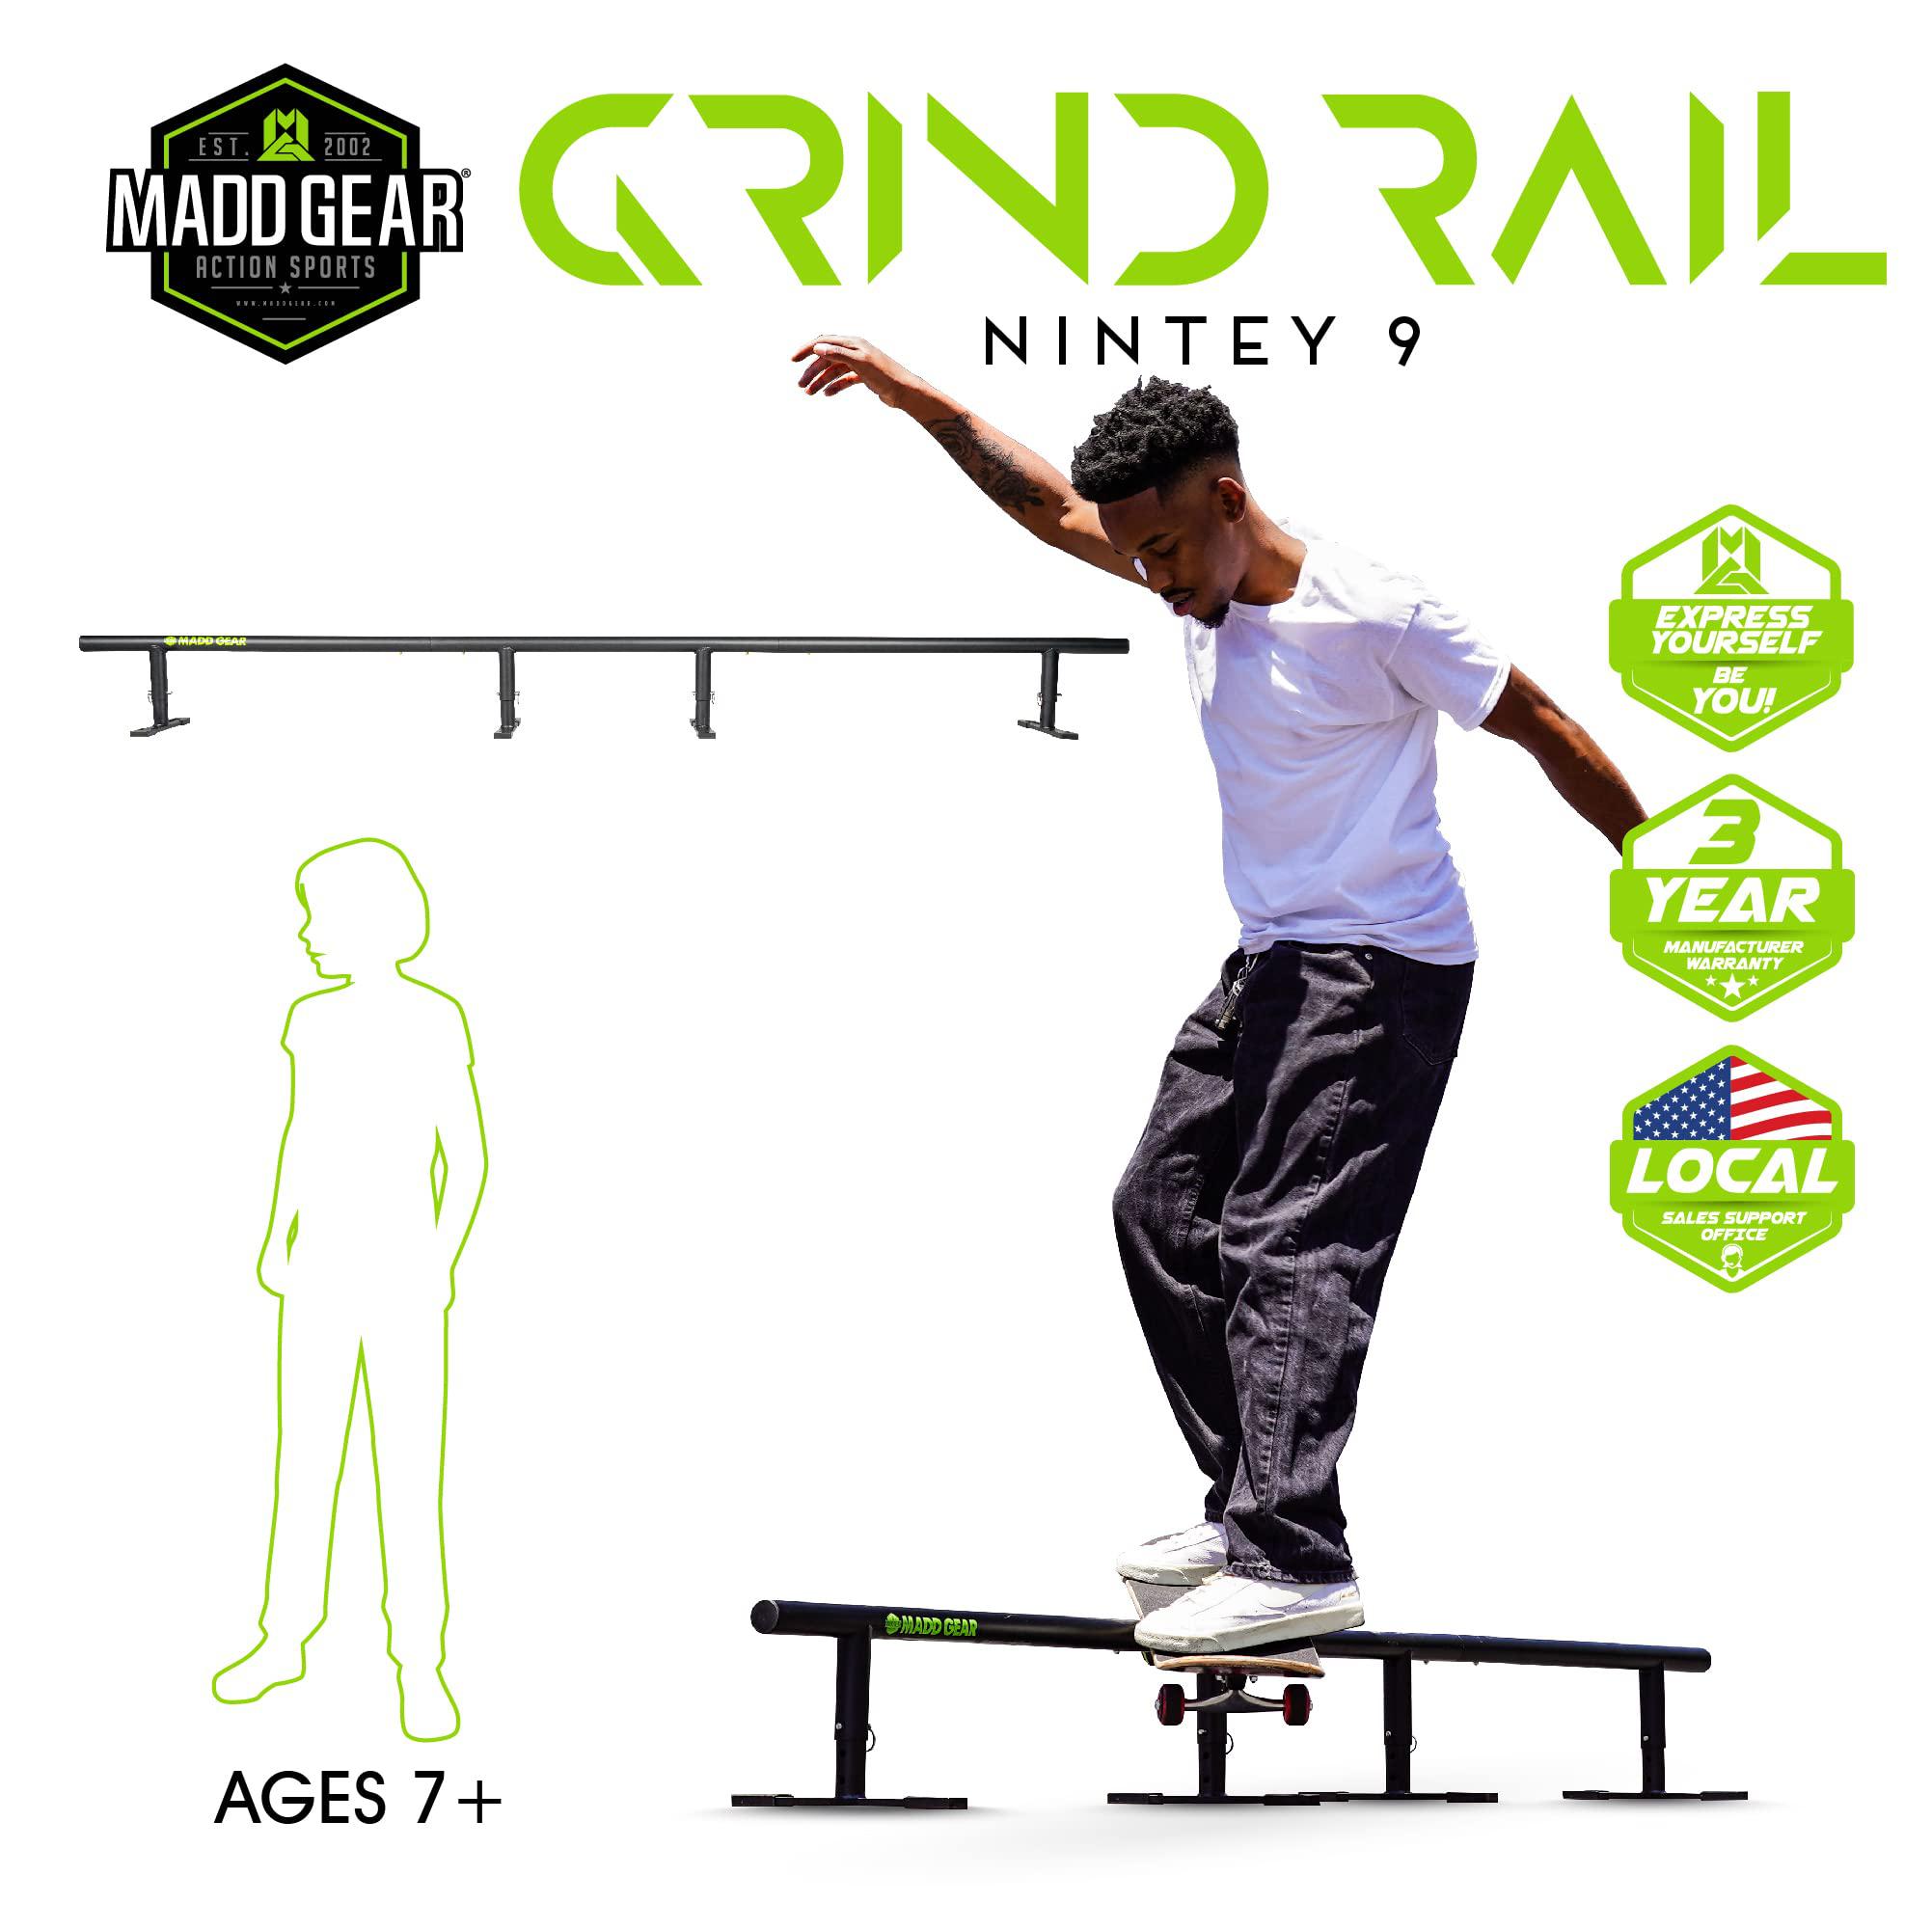 madd gear 99" long flat bar skate rail - heavy duty durable round skateboard pro scooter or inline skate - adjustable height 